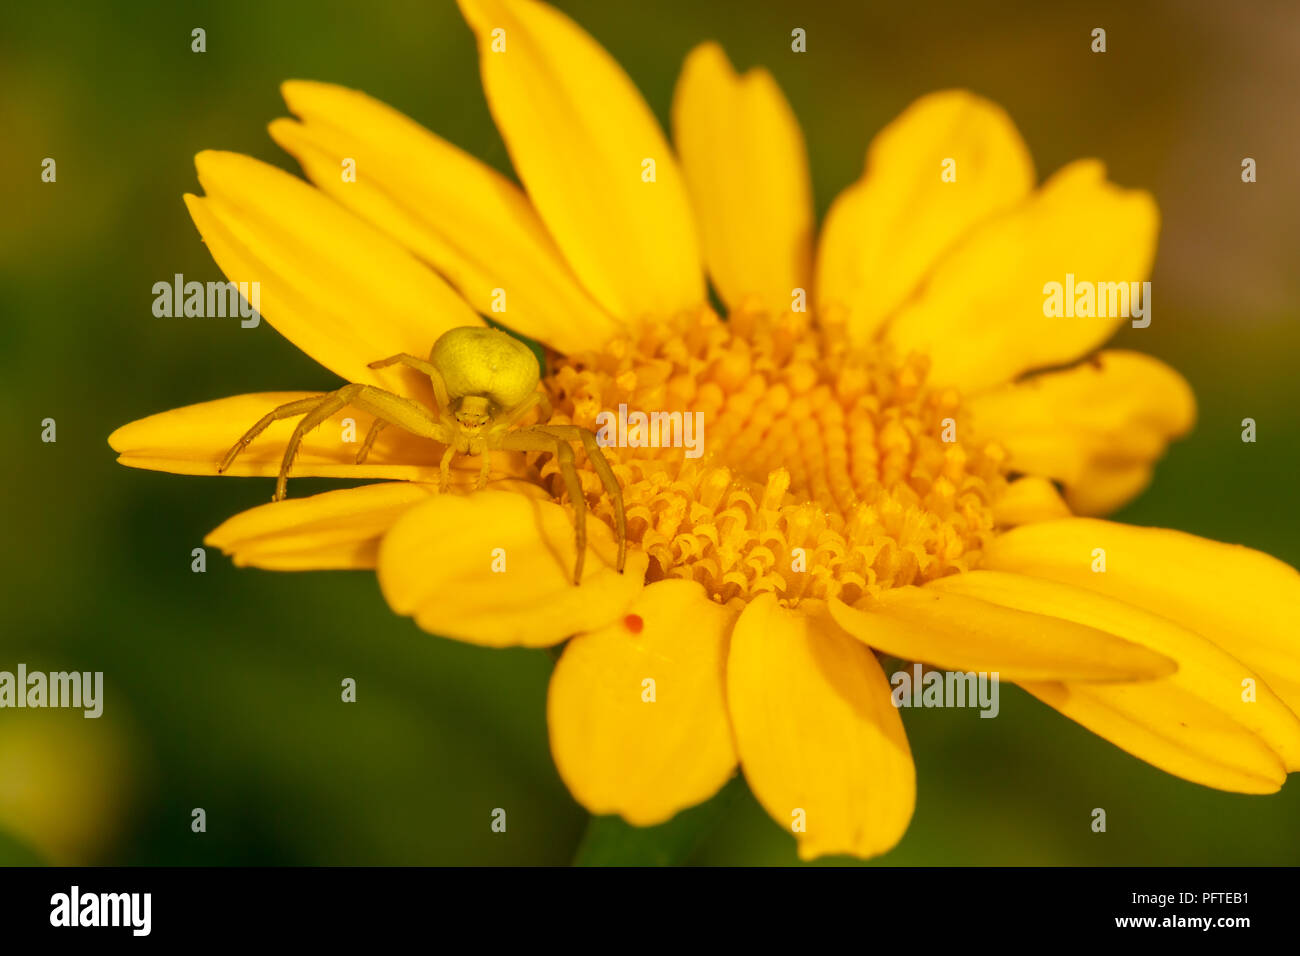 Macro shot of Crab spider camouflaged on yellow daisy face-on. Stock Photo